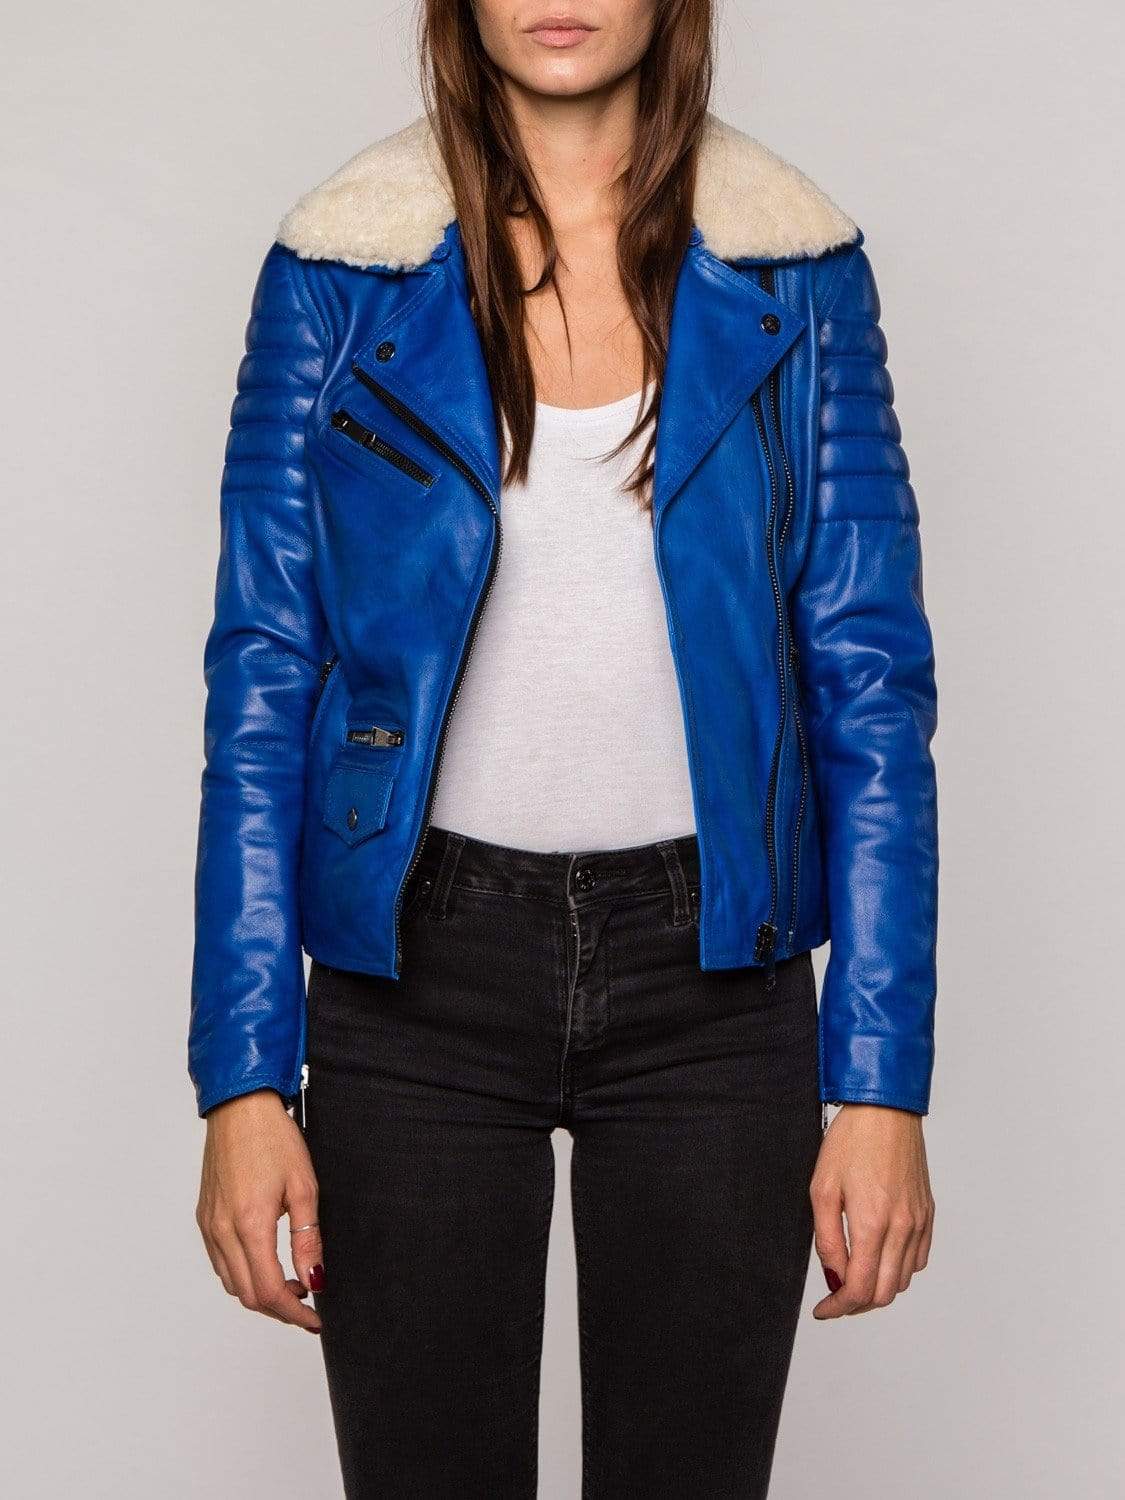 Blue Fur Collared Leather Jacket